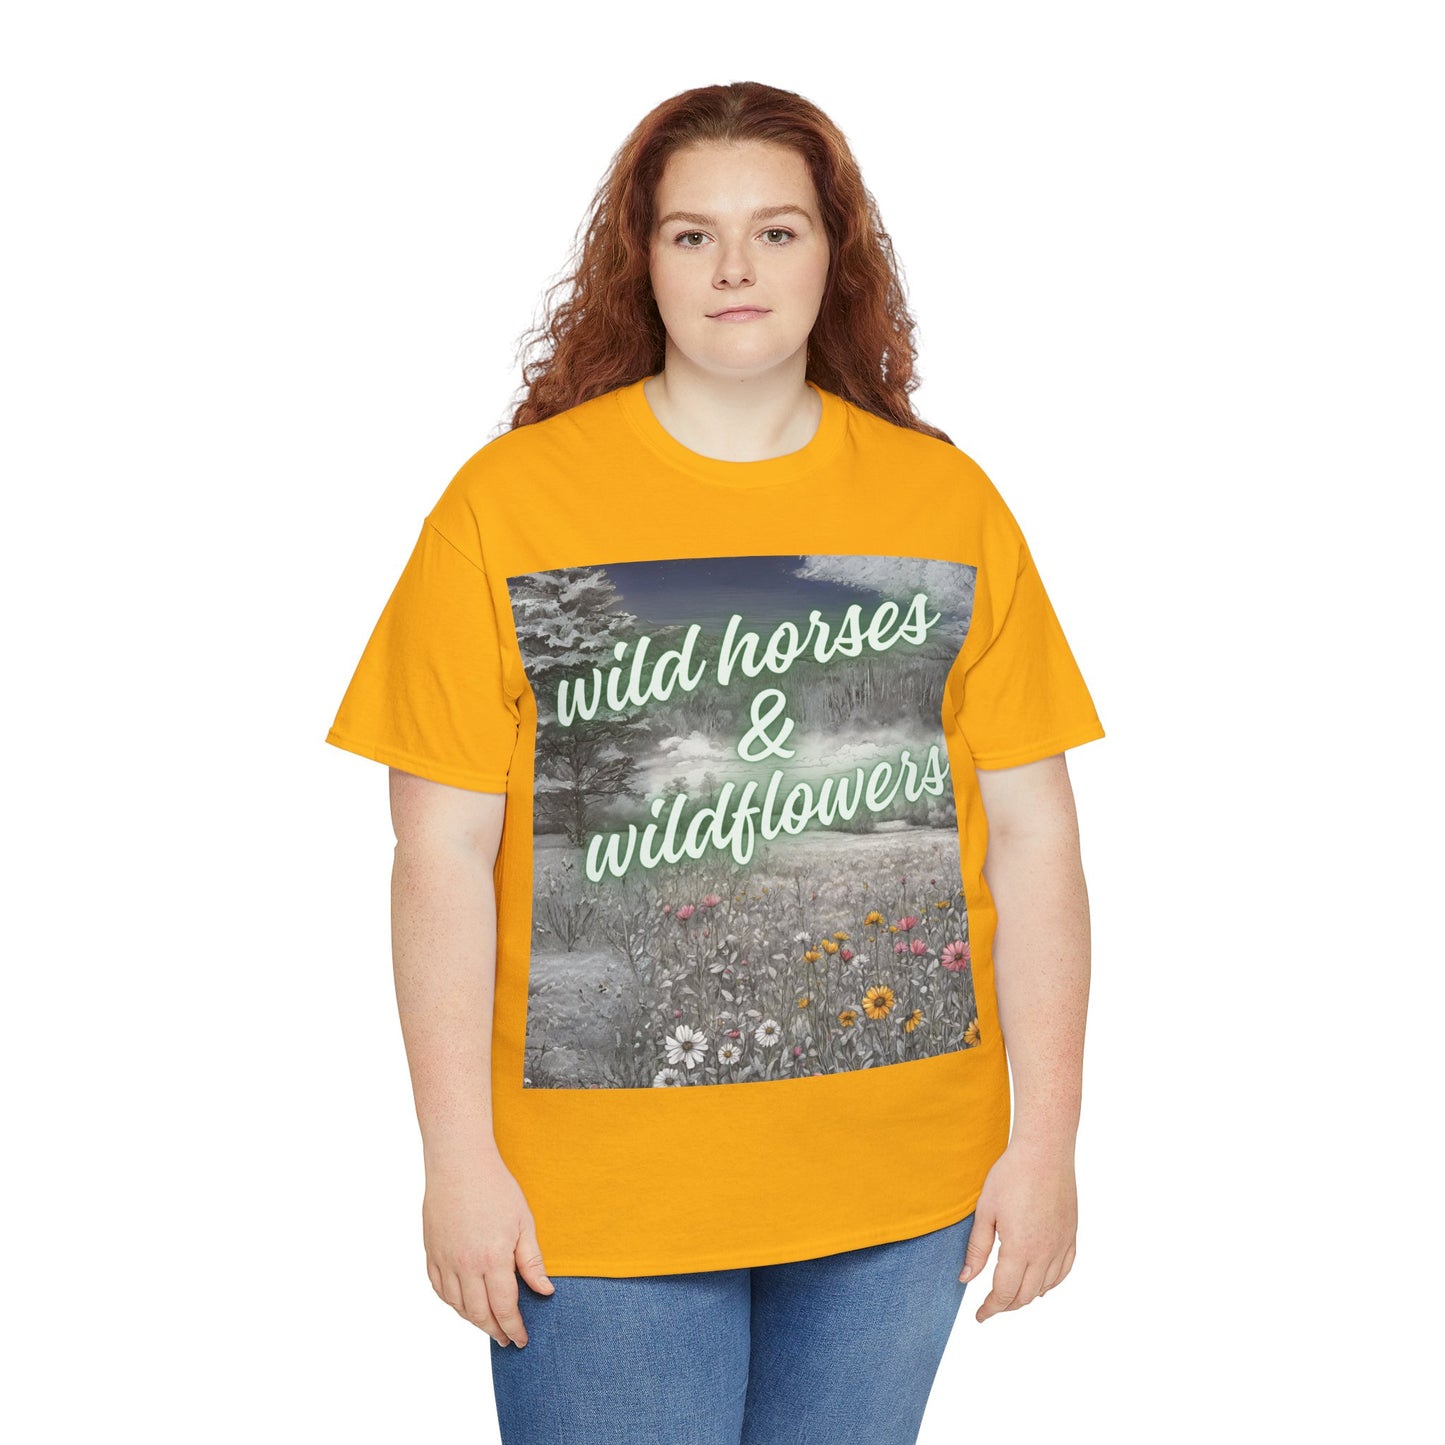 Wild Horses & Wildflowers Country Cowgirl Women's Plus Short Sleeved Cotton Tee Size xl-5xl